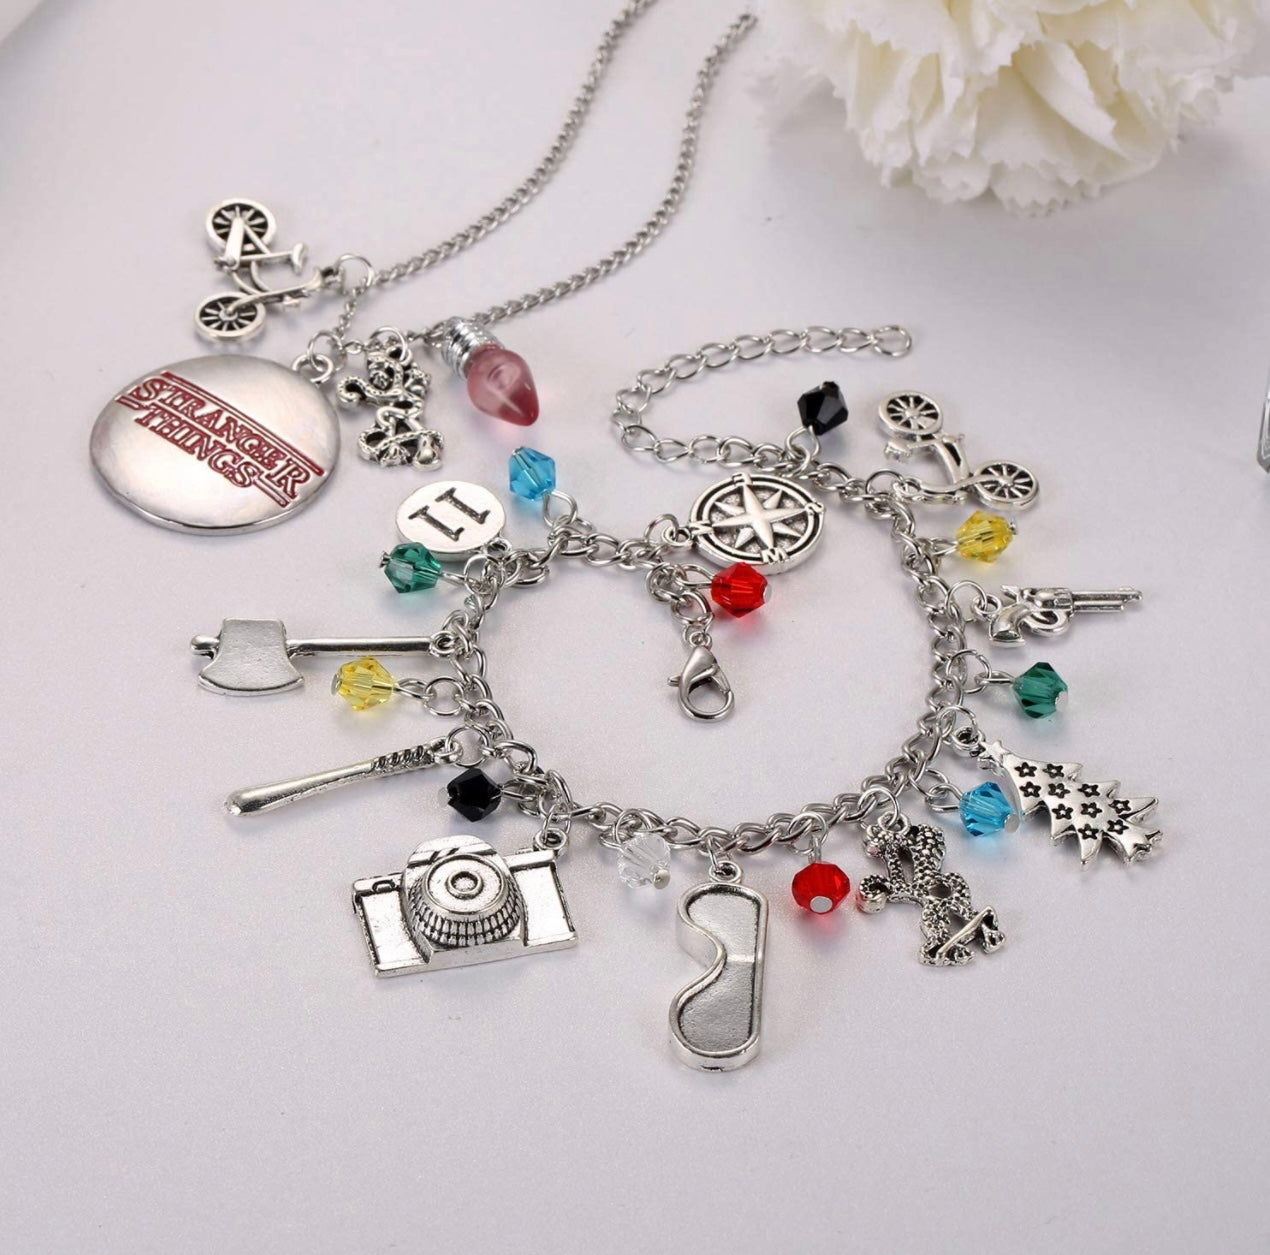 2PC Stranger Things Themed Charm Bracelet And Necklace Set